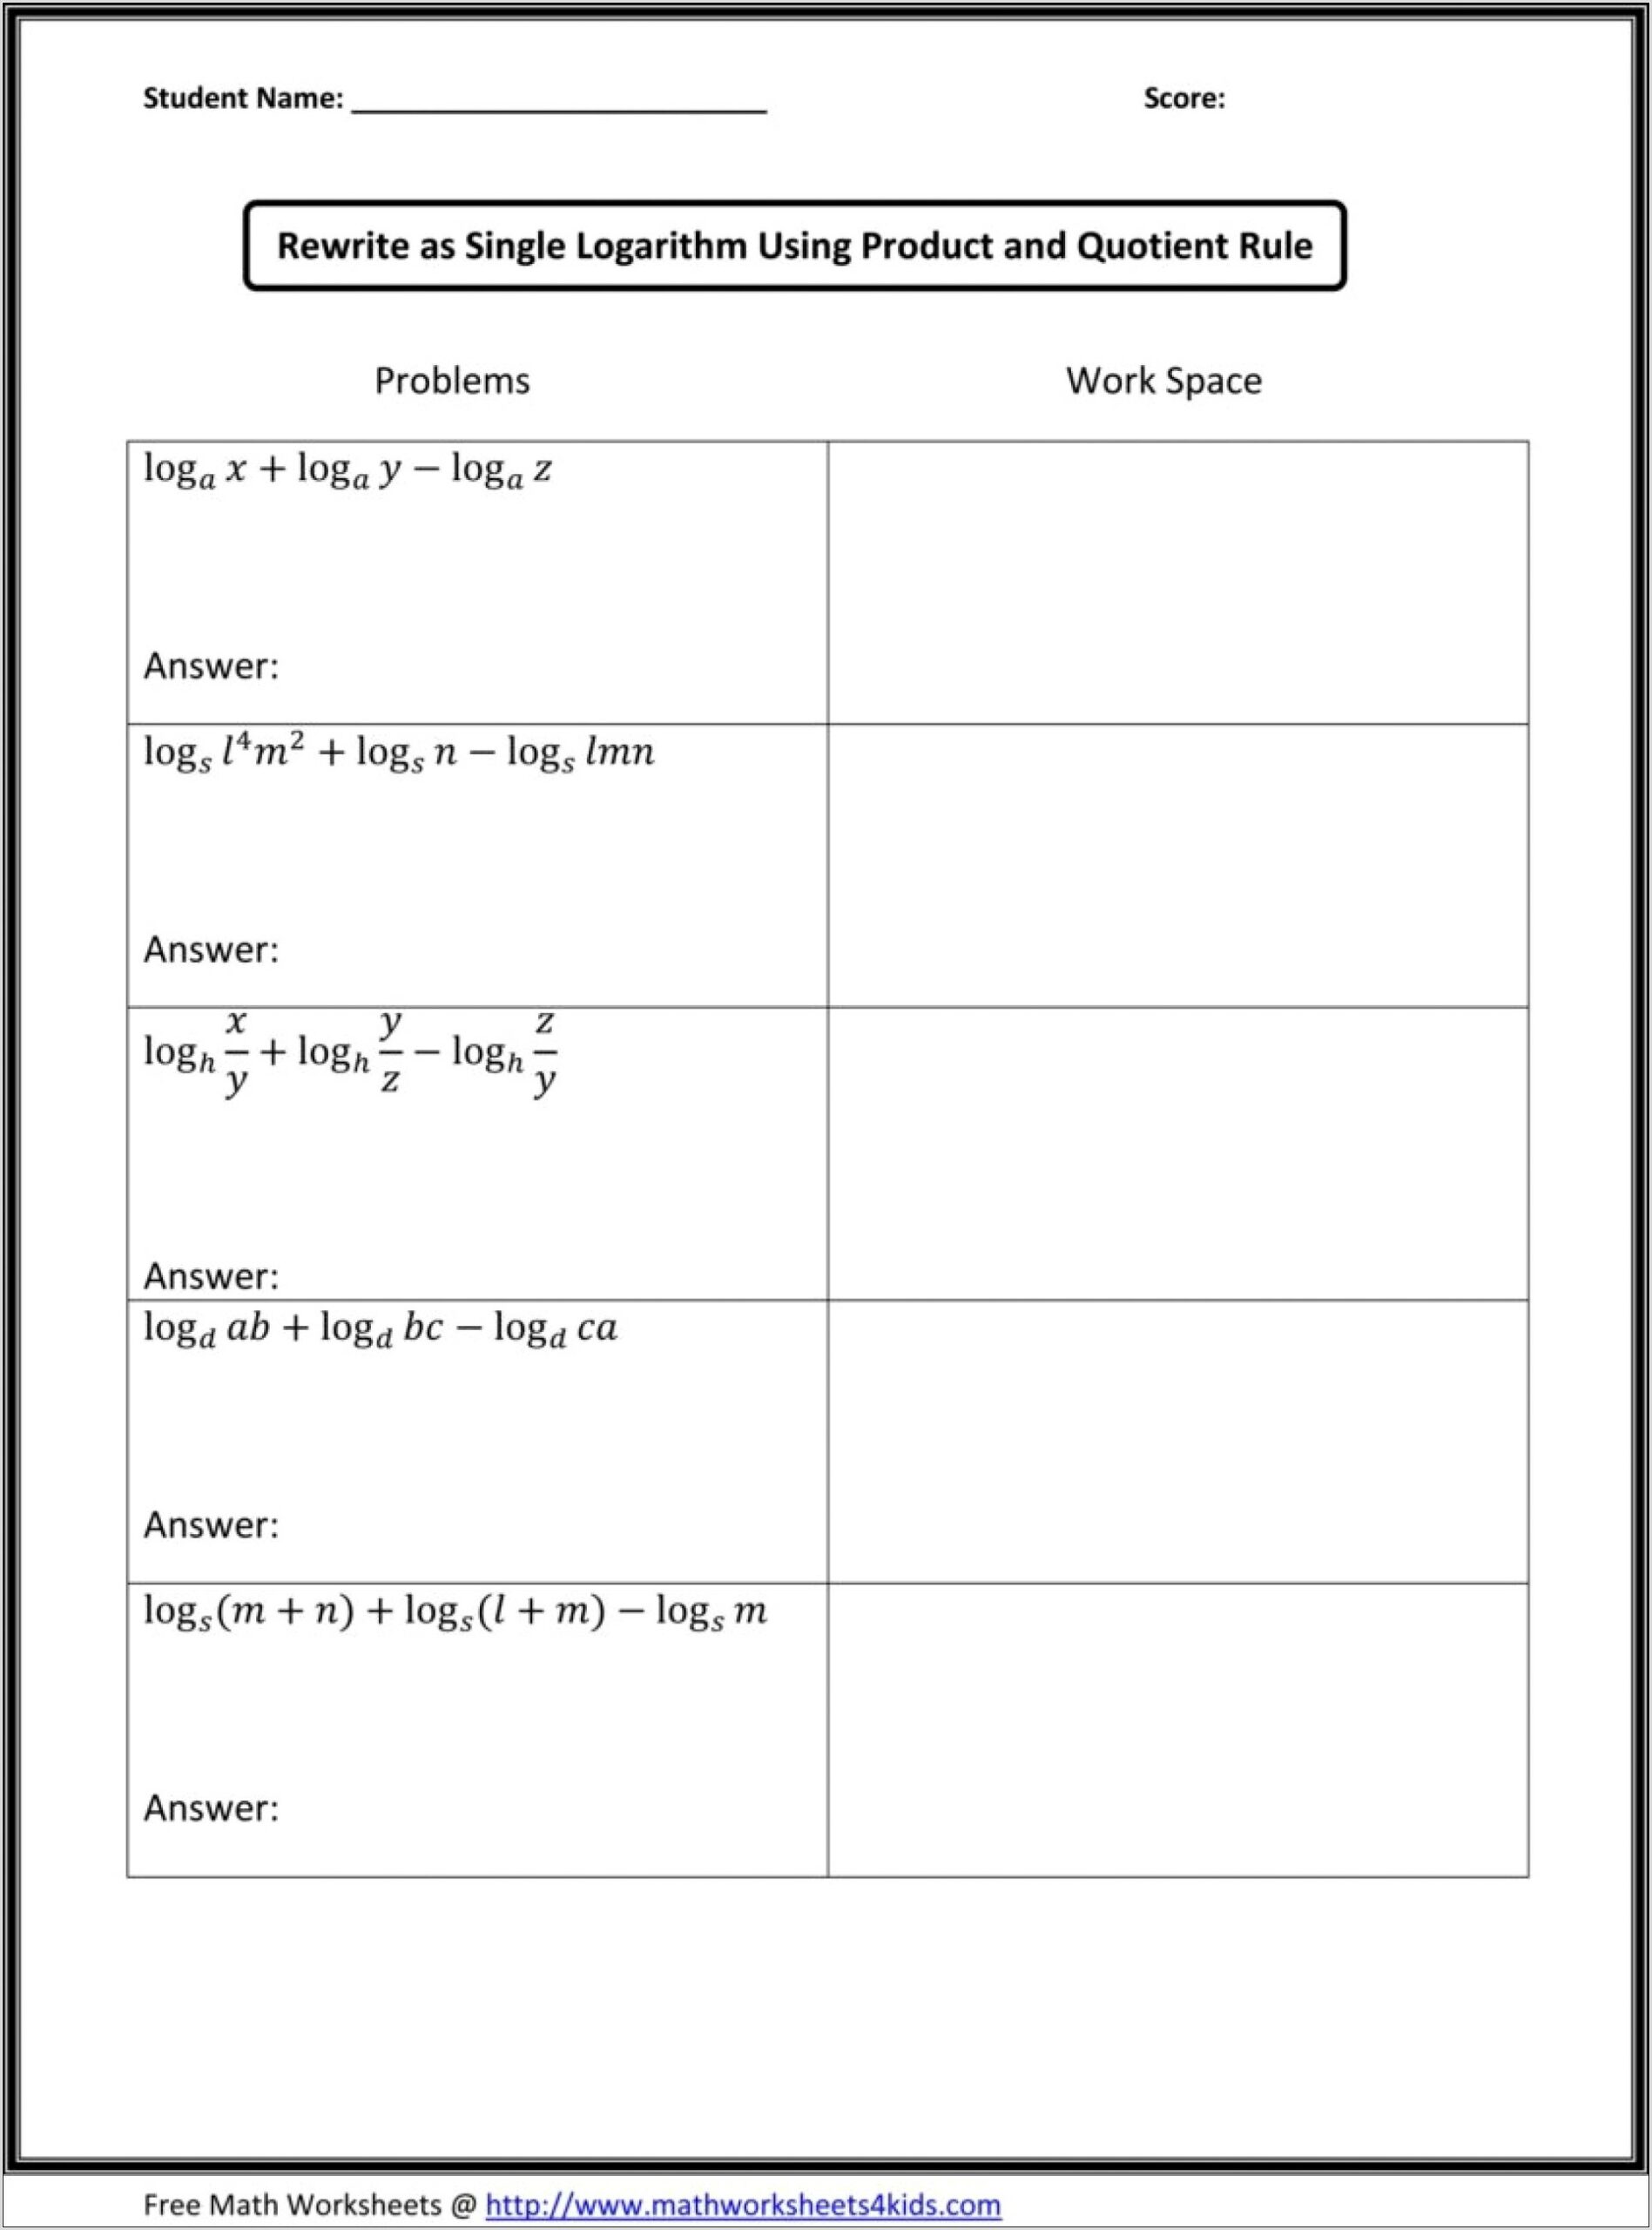 Rational Numbers Worksheet For 8th Grade